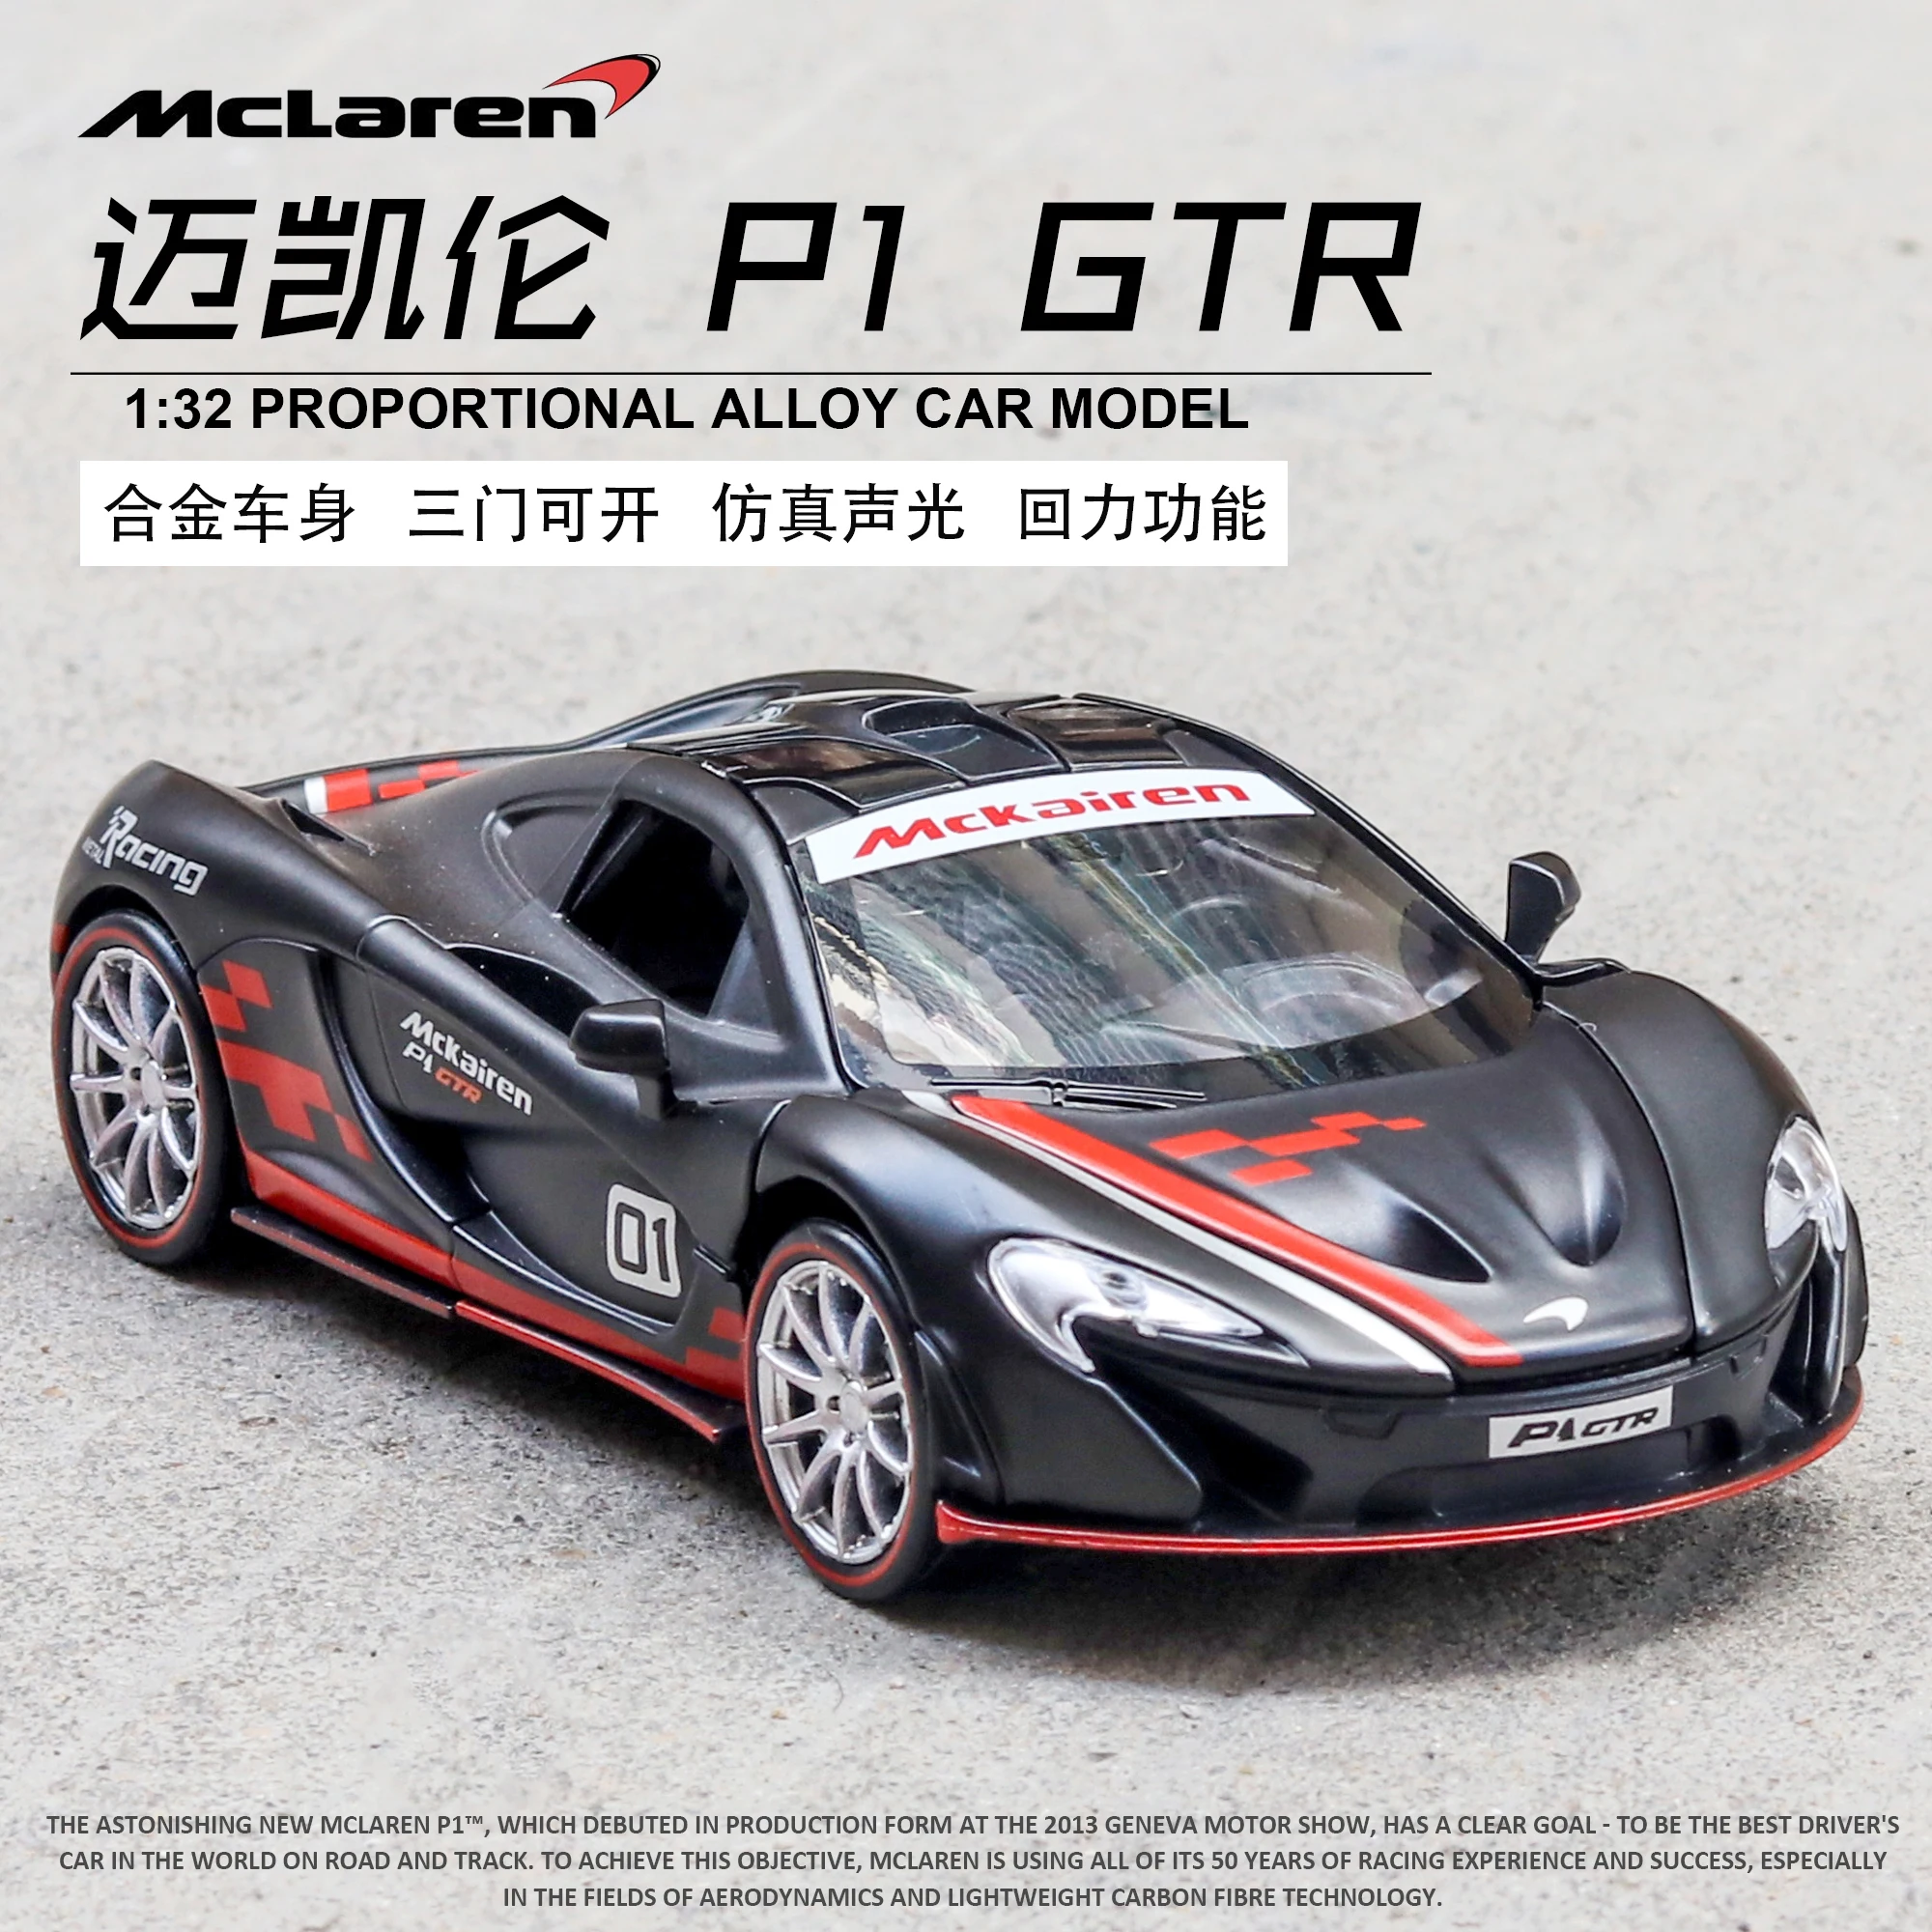 

1:32 McLaren P1 Alloy Diecast Car Model Toy Vehicles Electronic Car With Light Sound Gift for Kids Collectible Car Models